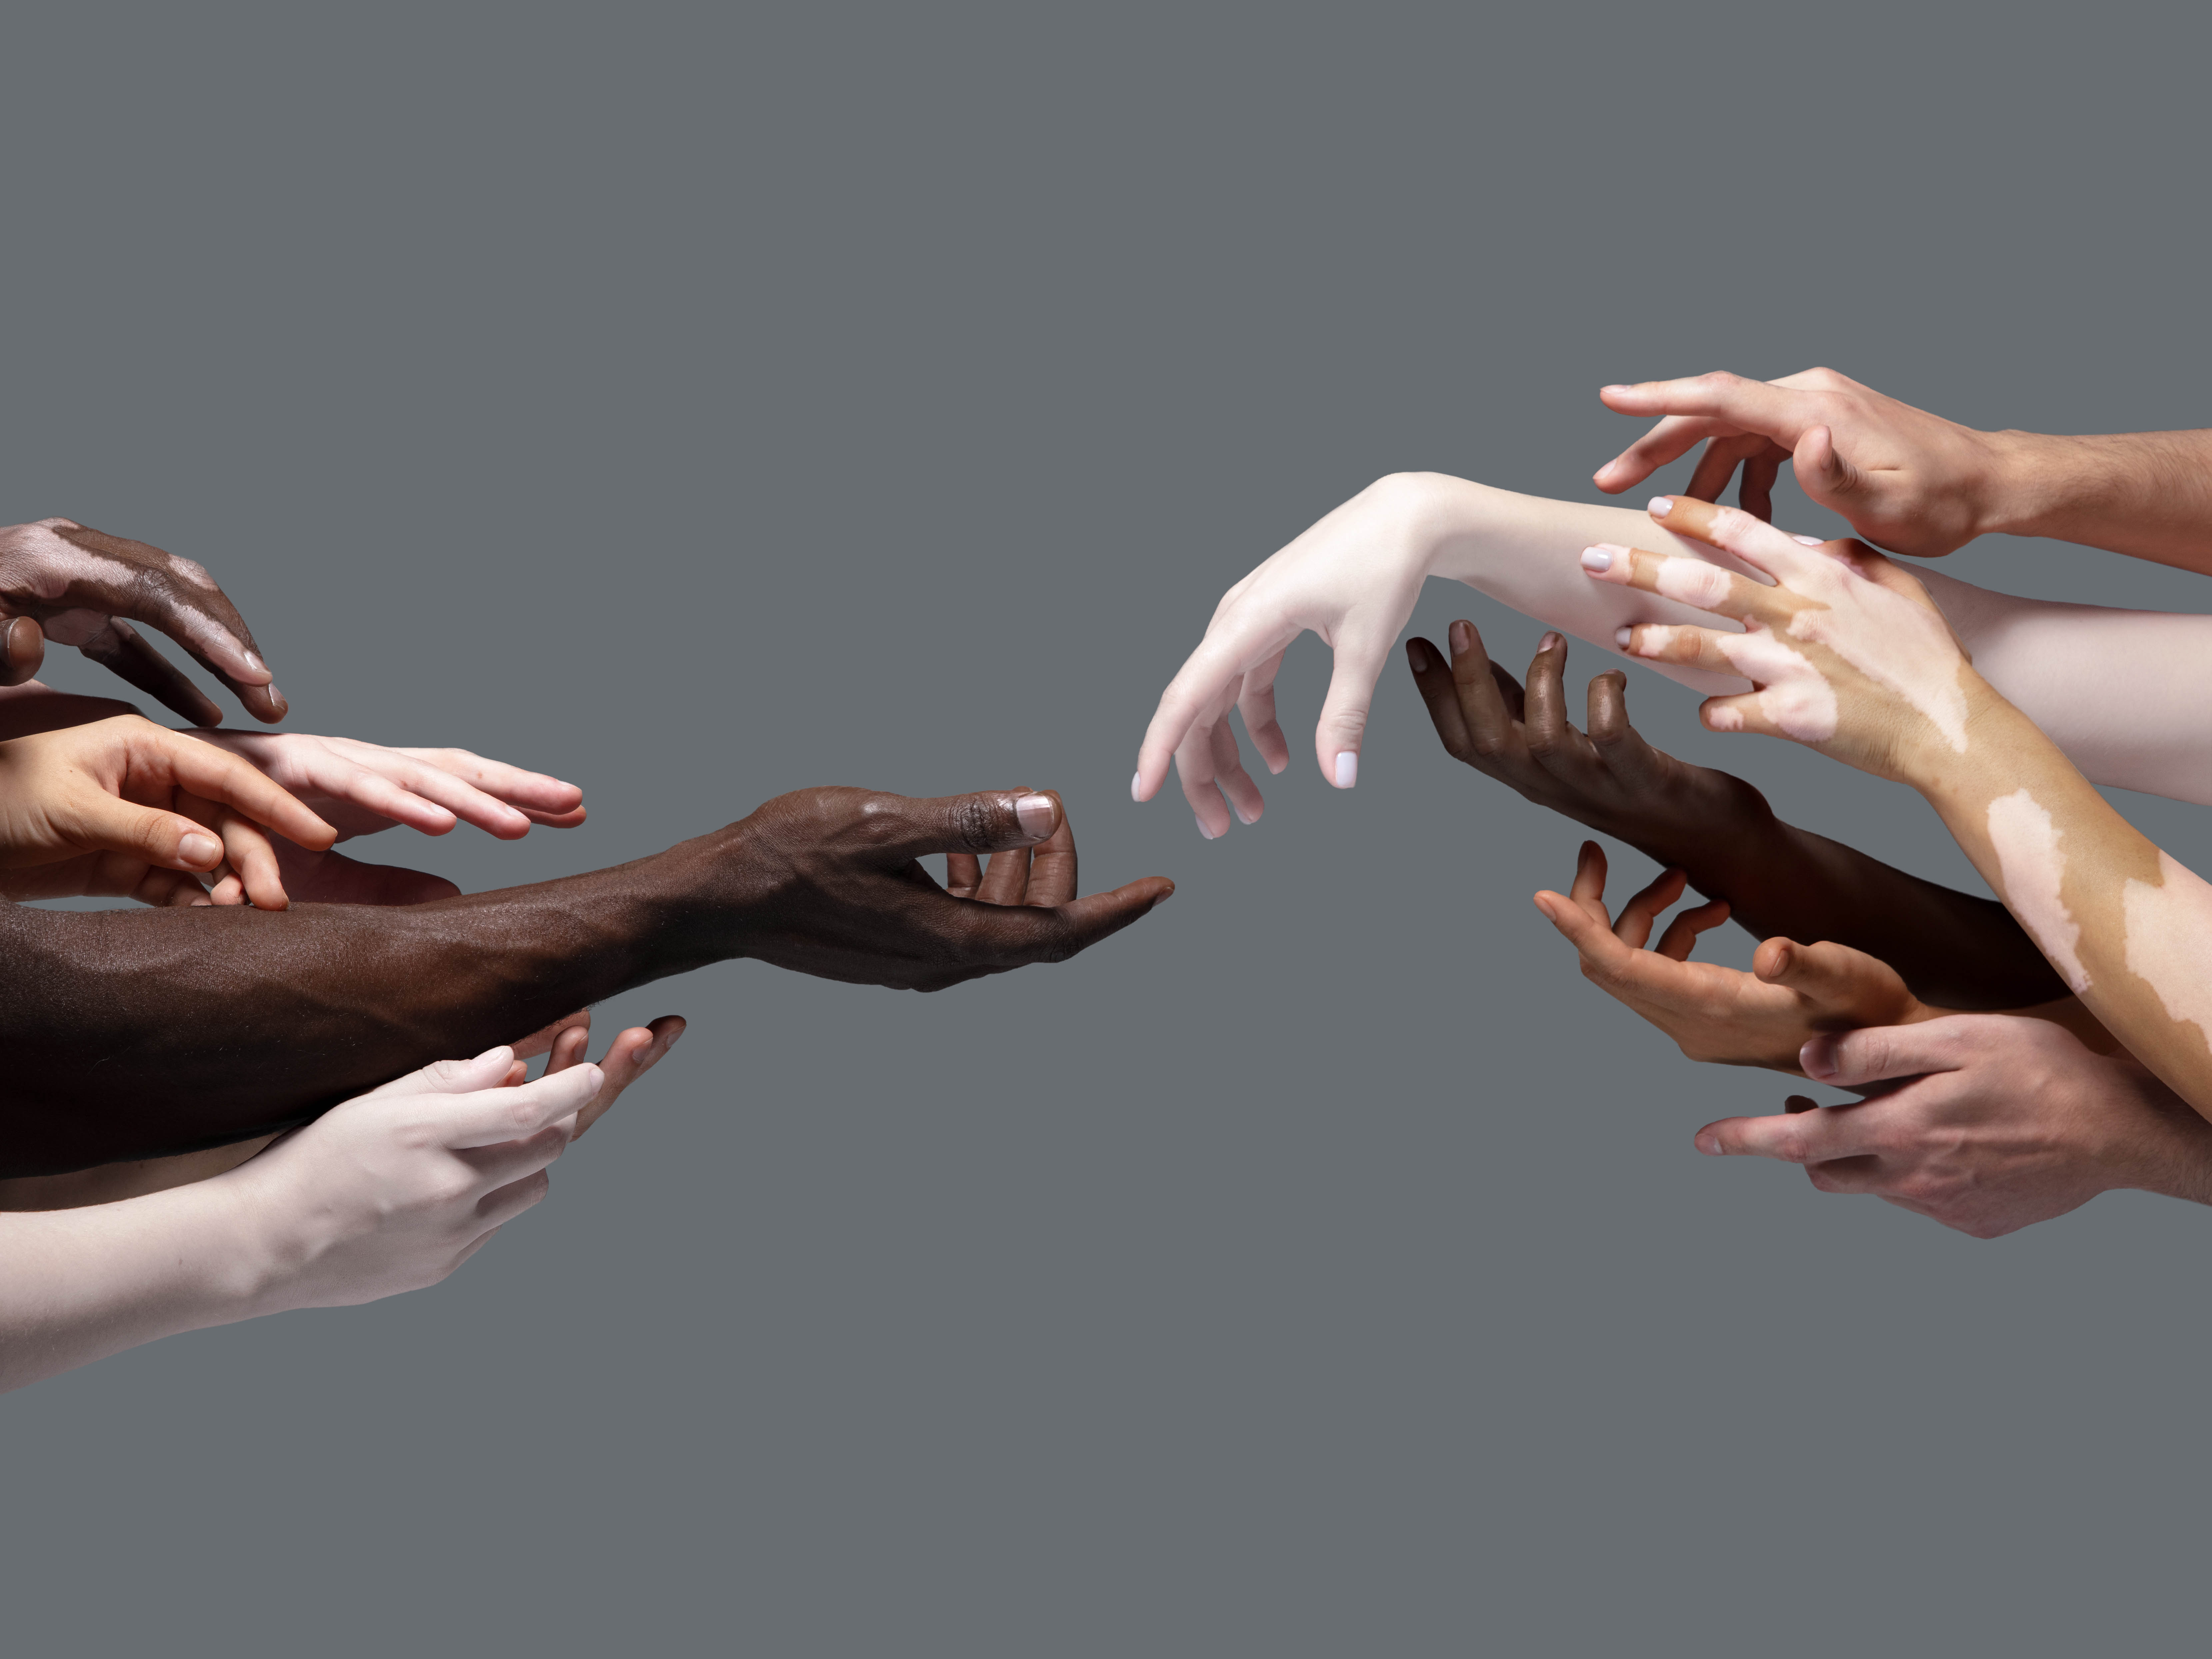 Collection of racially diverse hands reaching towards each other, on a gray background